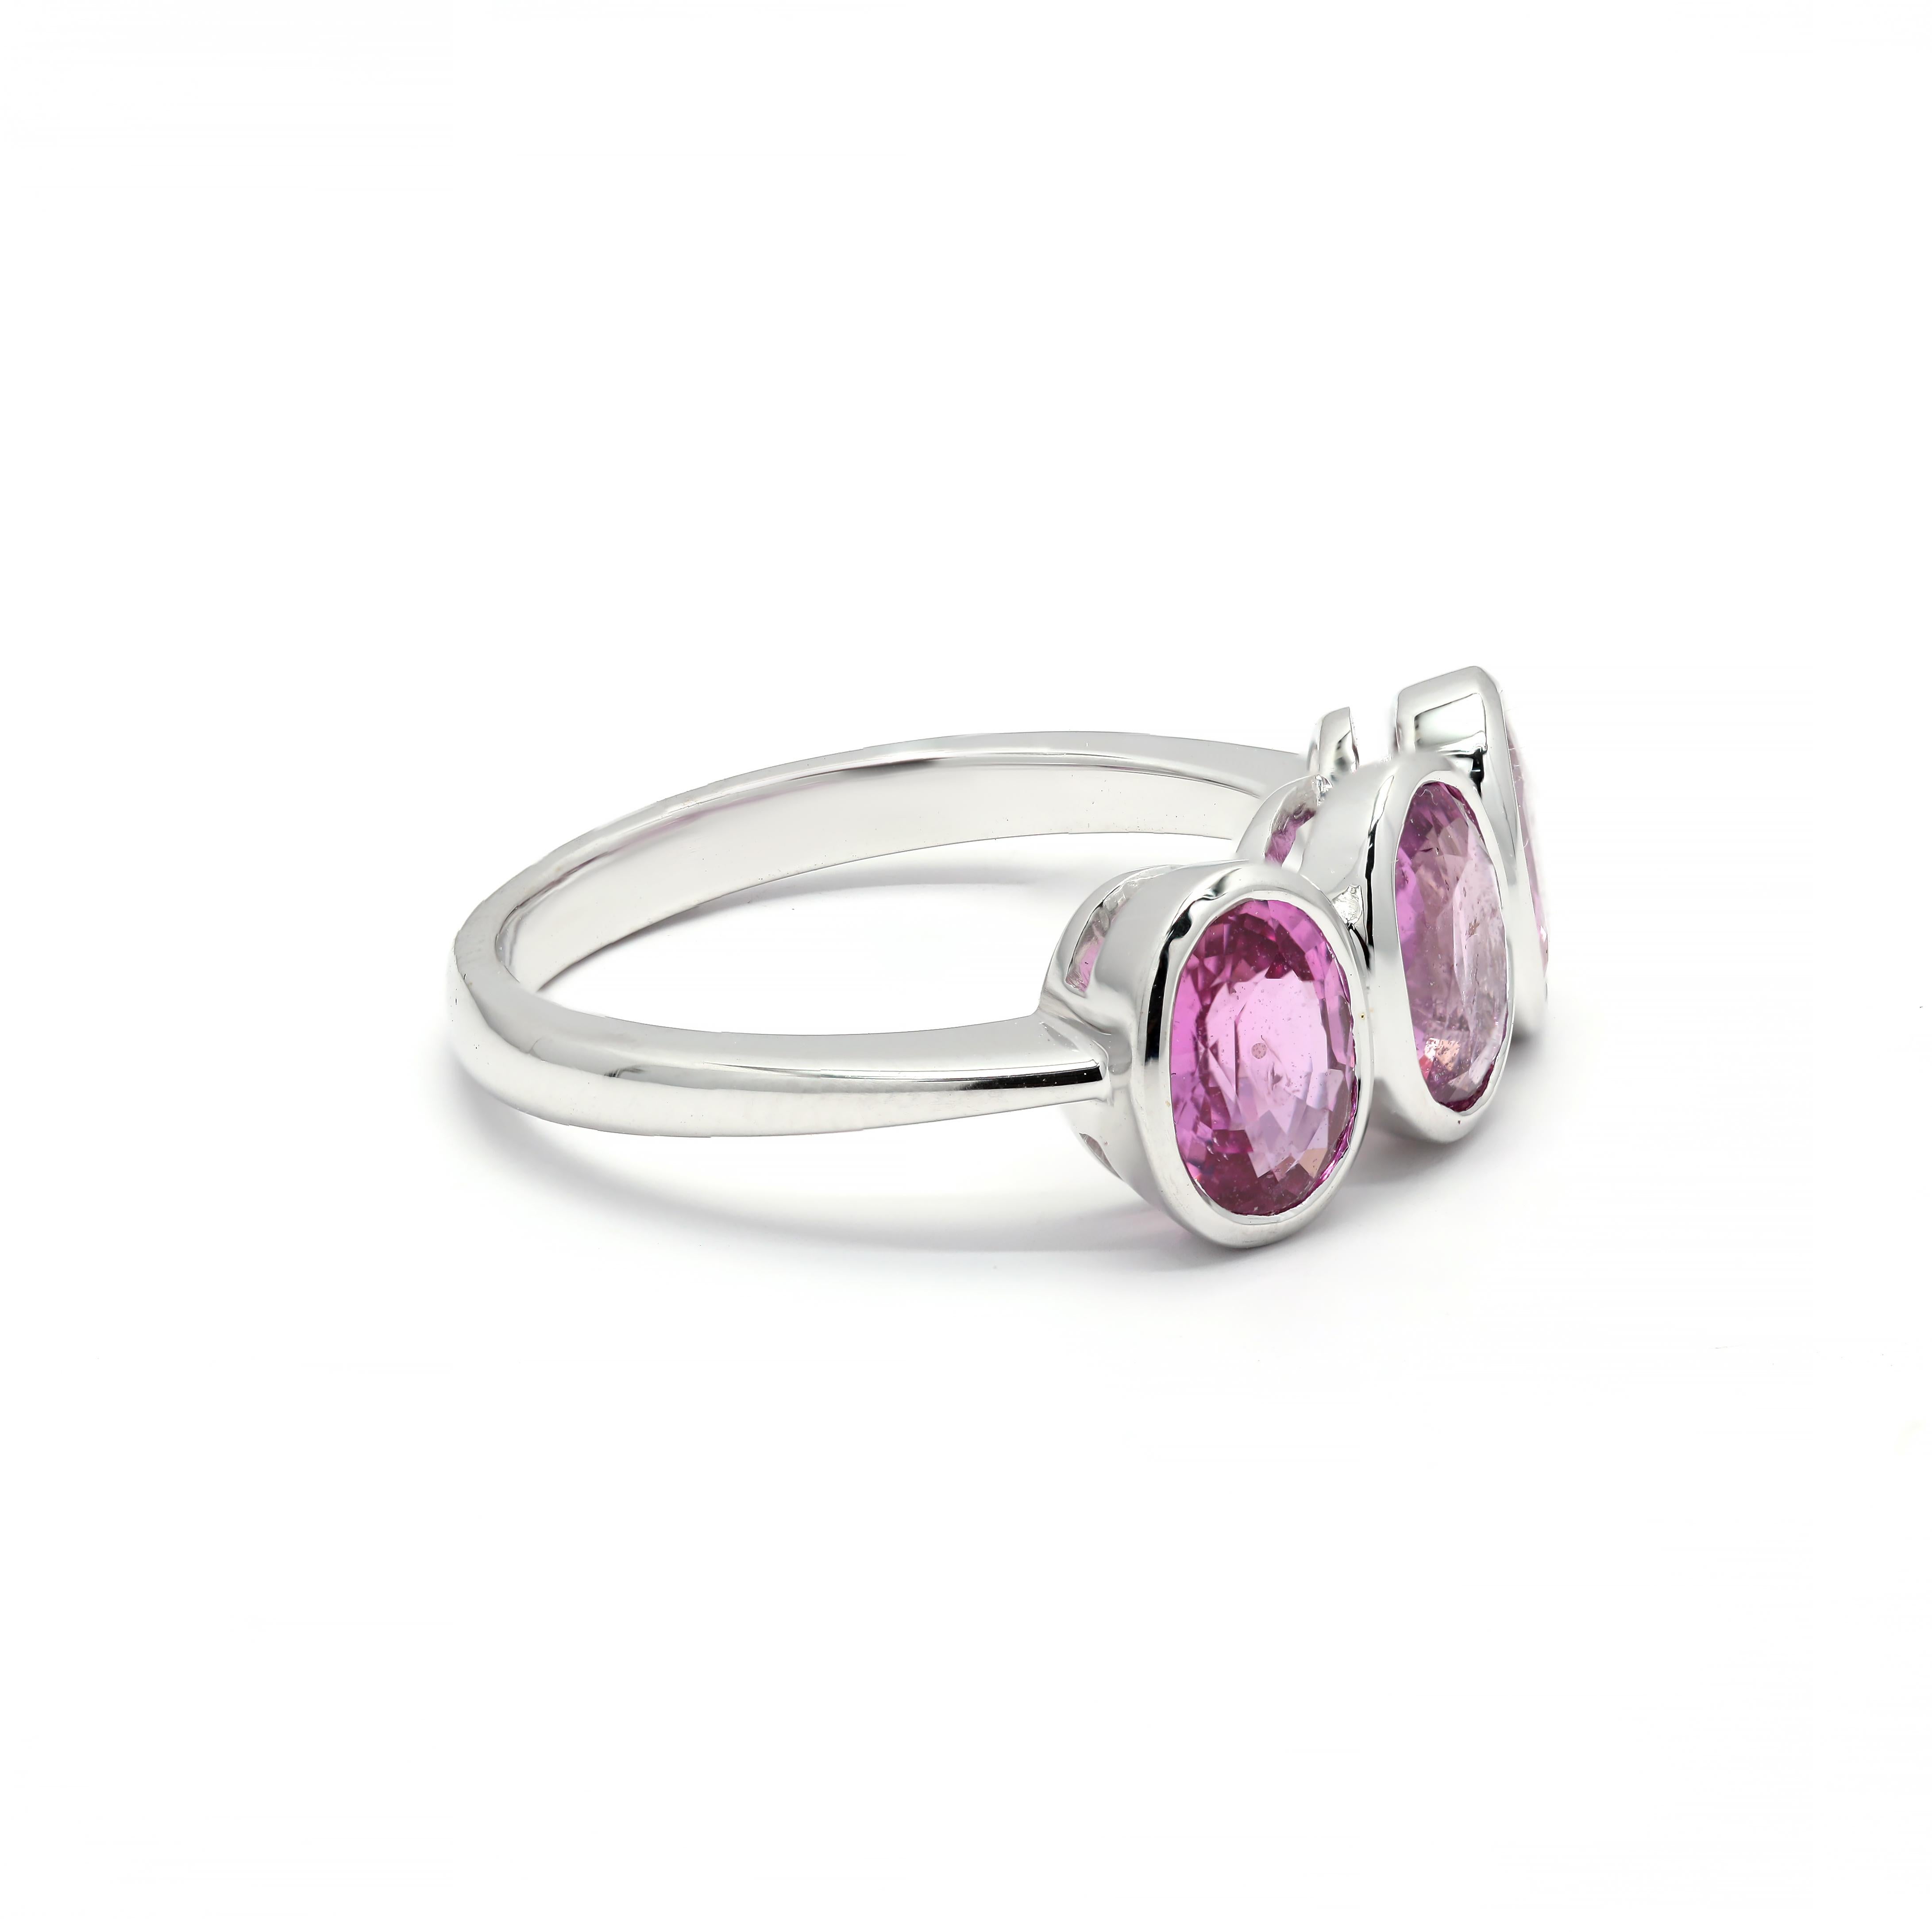 For Sale:  3.54 ct Three Pink Sapphire Gemstone Ring in 18K White Gold, Three Stone Ring 3